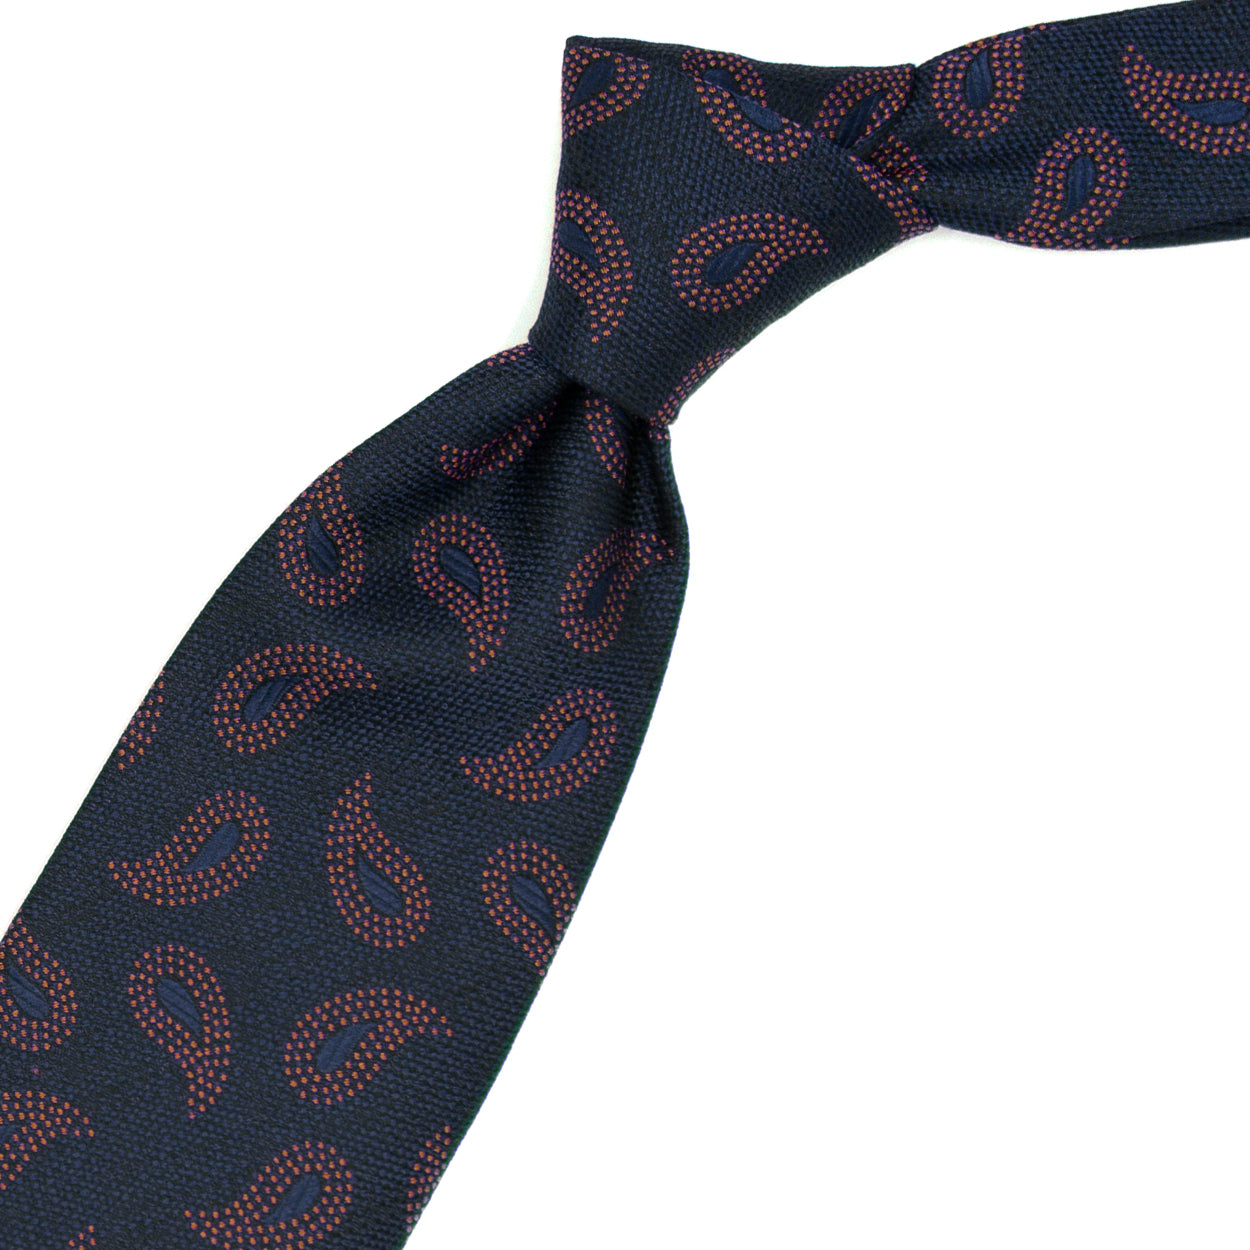 Blue tie with brown paisleys